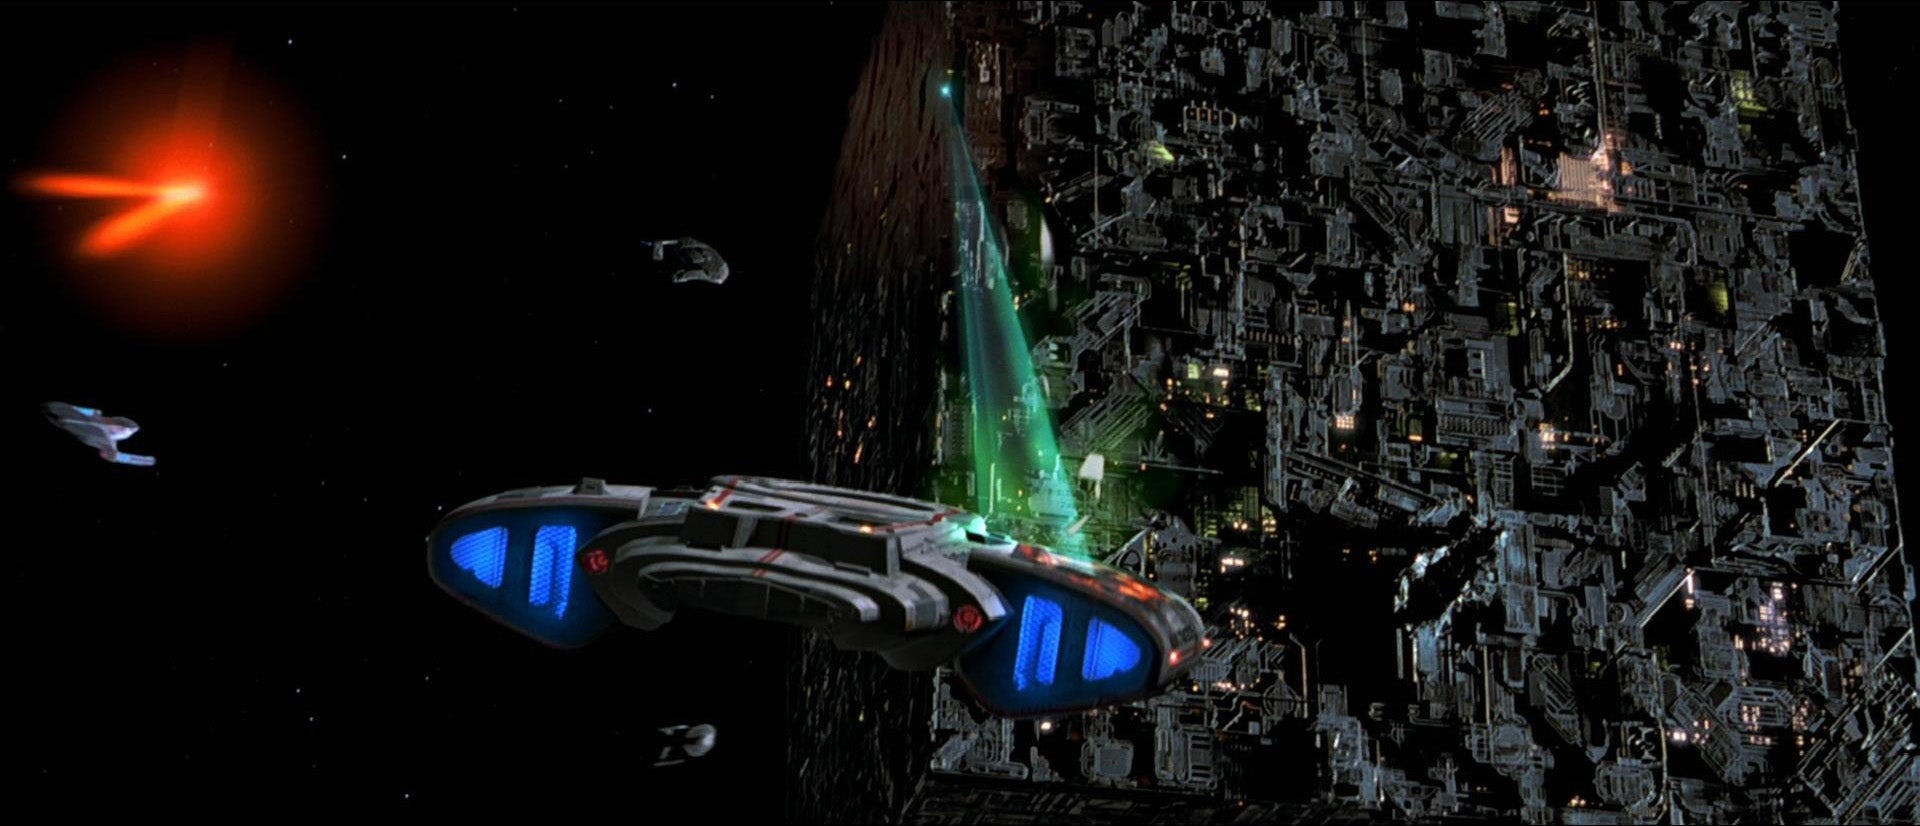 Federation ships approach the Borg Cube as it scans them in Star Trek: First Contact